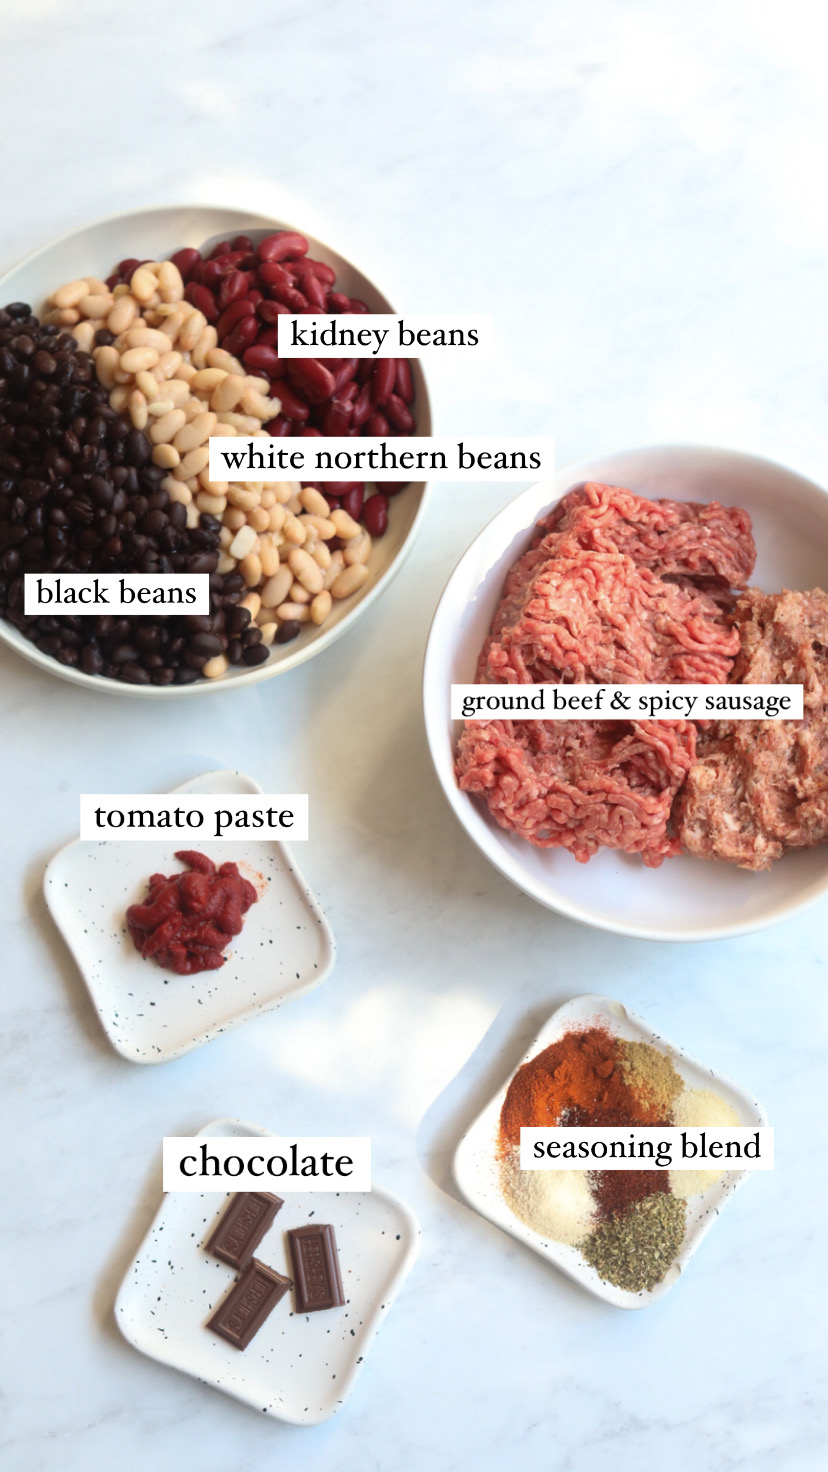 Sweet chili ingredients in a flat lay; kidney, white northern and black beans, bowl of ground beef and spicy sausage, tomato paste, chocolate and chili seasoning blend.